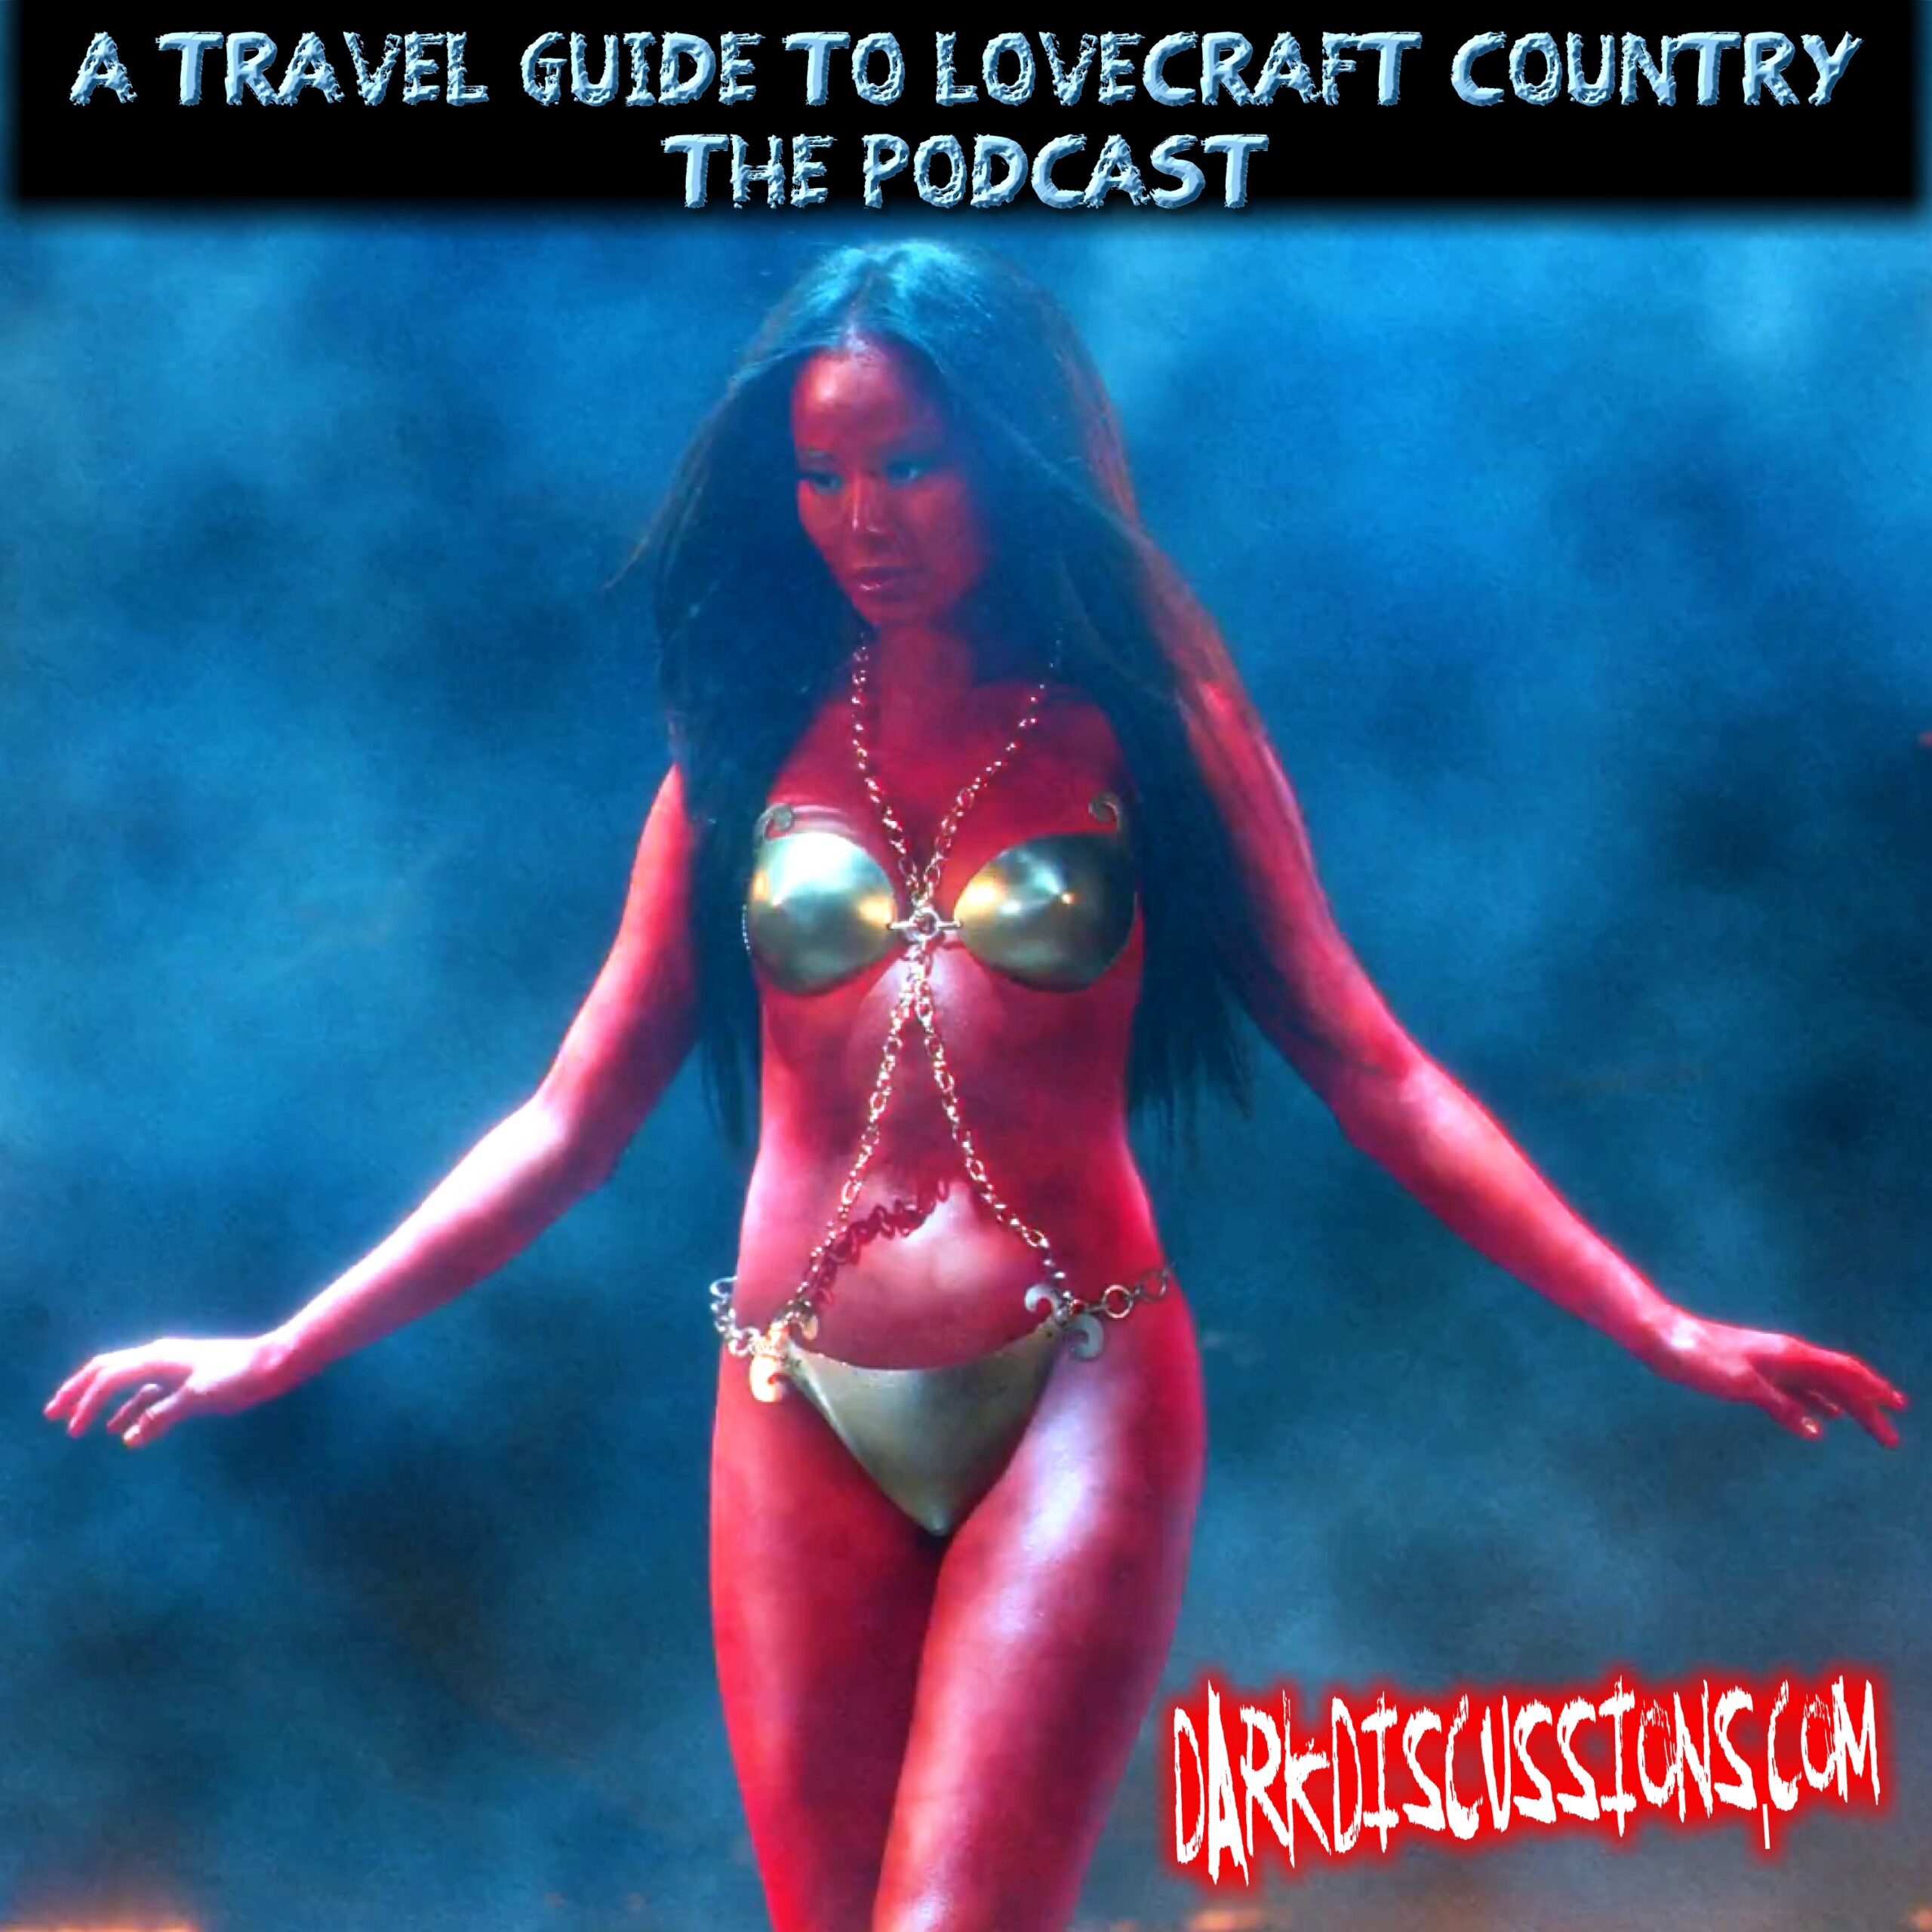 Artwork for podcast A Travel Guide To Lovecraft Country - the Podcast